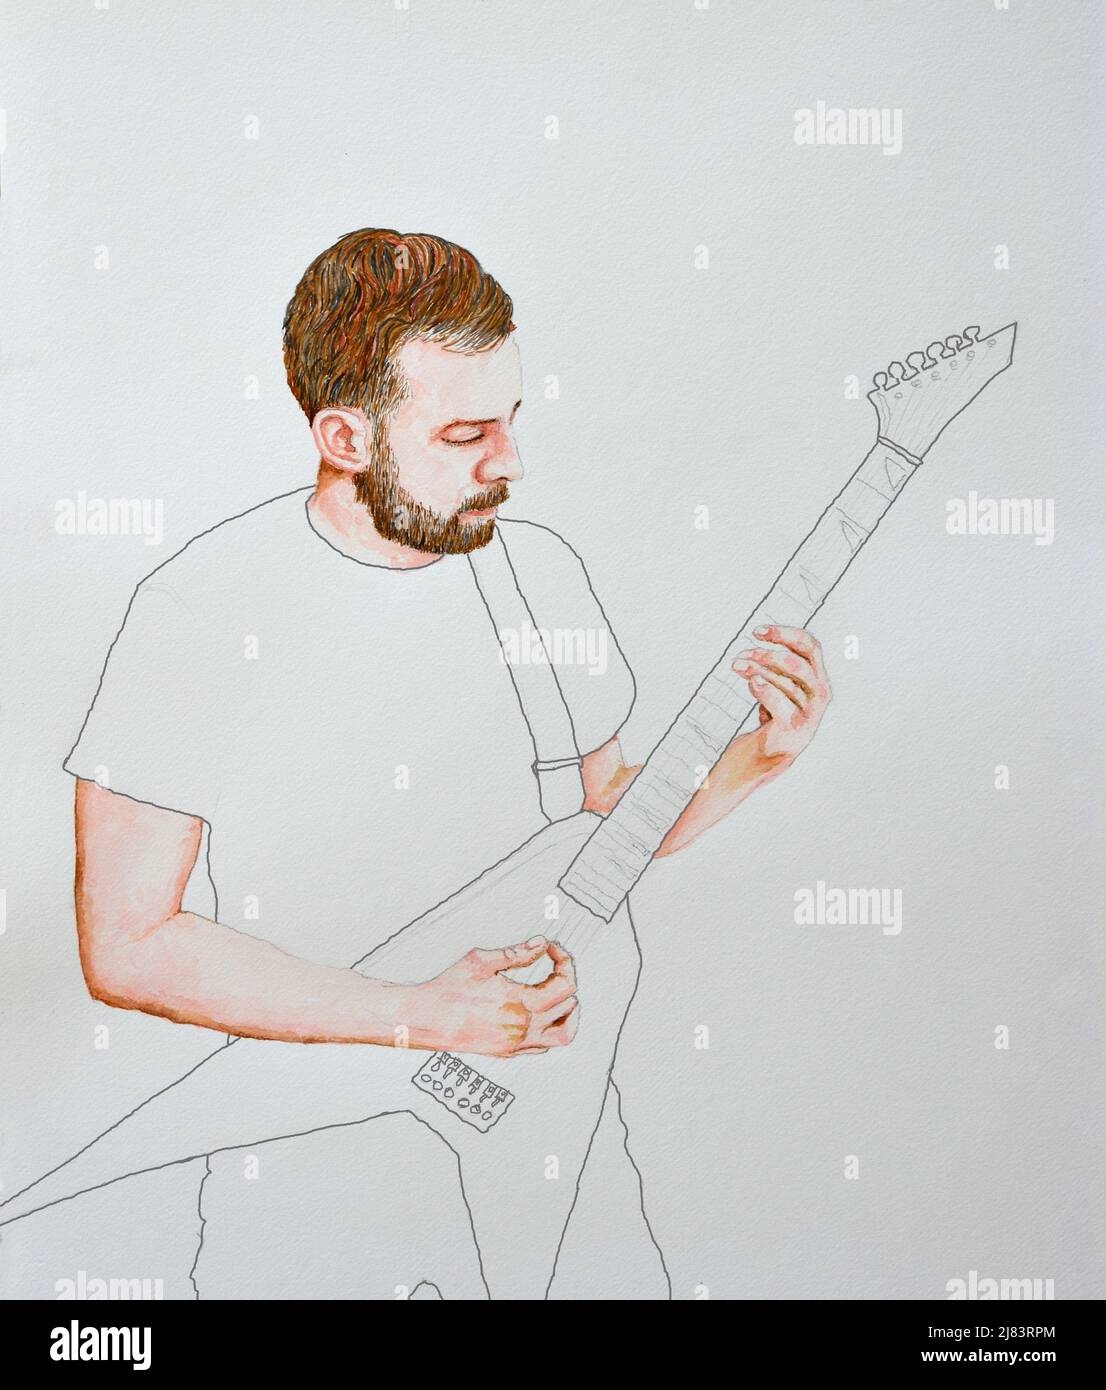 Painting of young man playing electric guitar Stock Photo